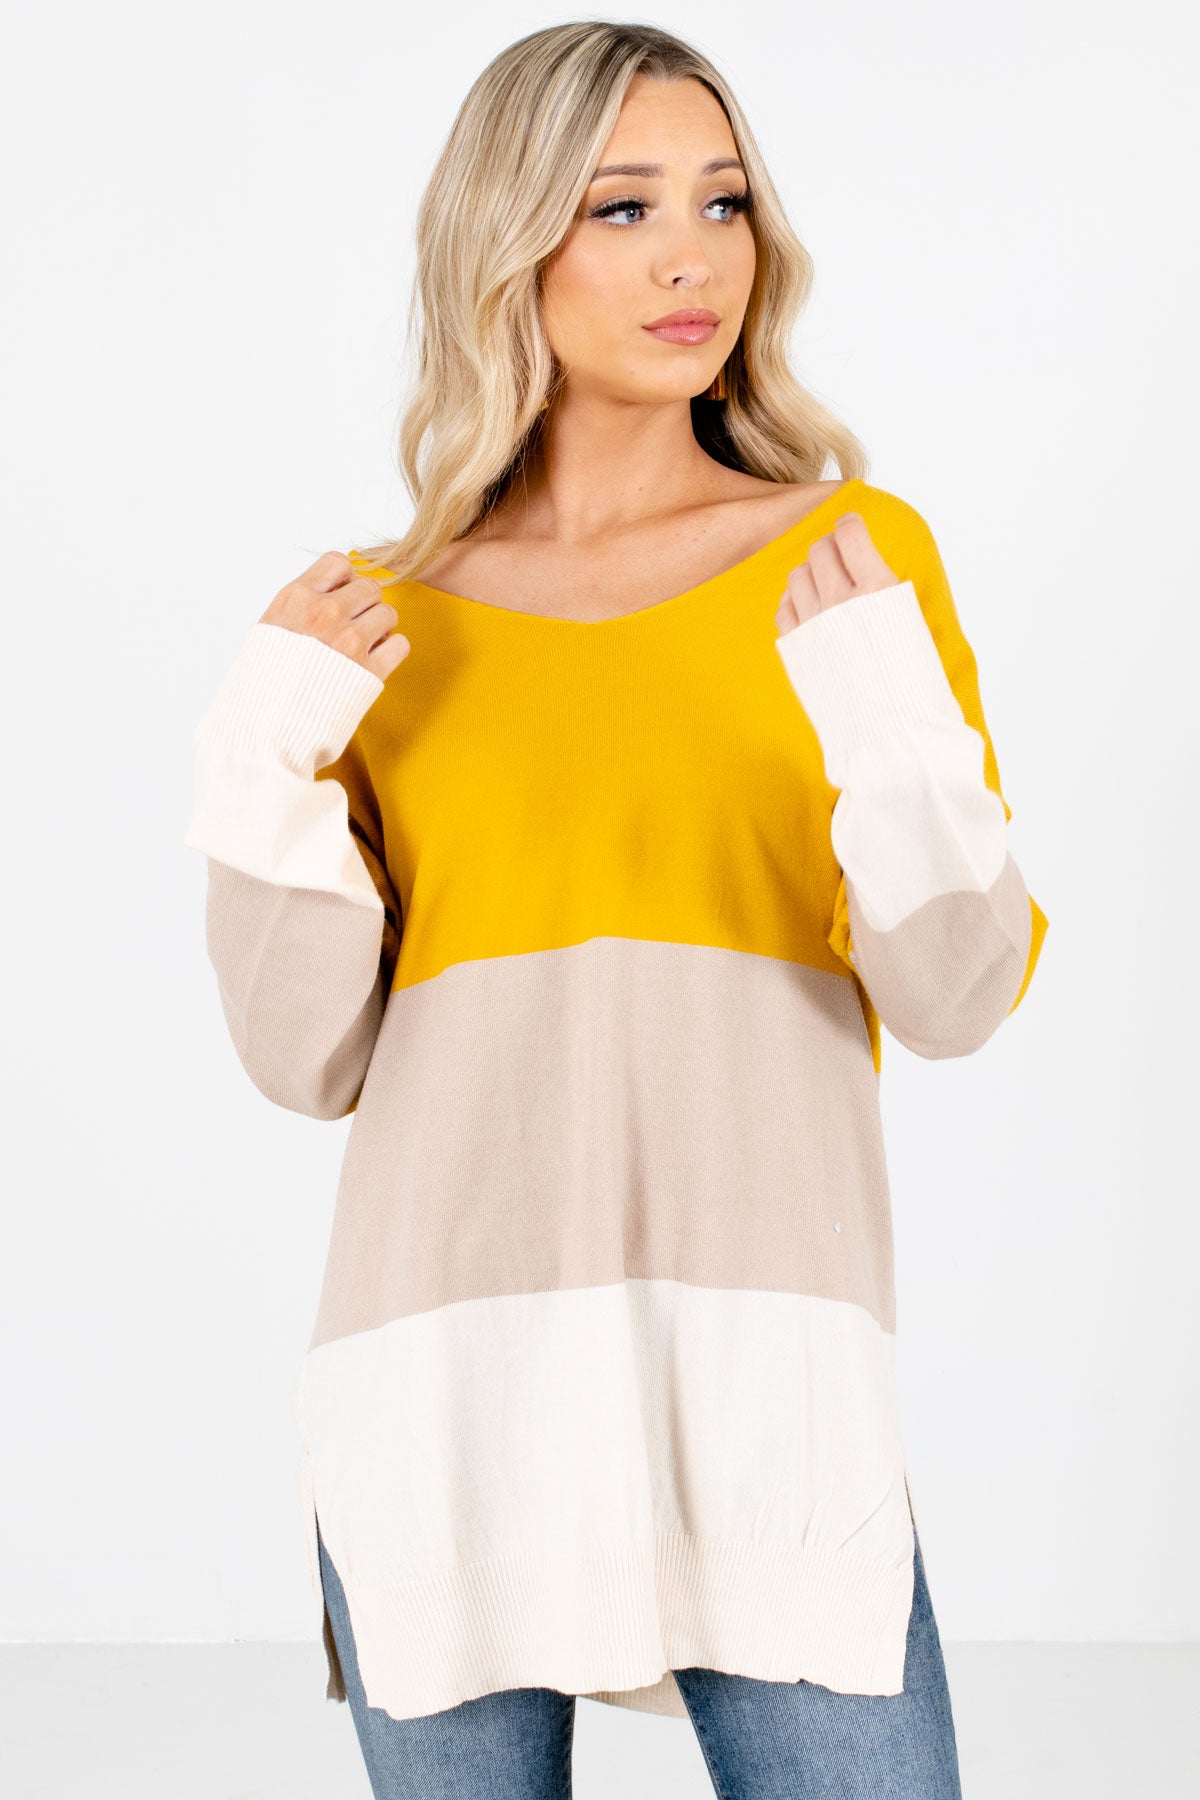 Women's Mustard High-Quality Soft Material Boutique Sweater